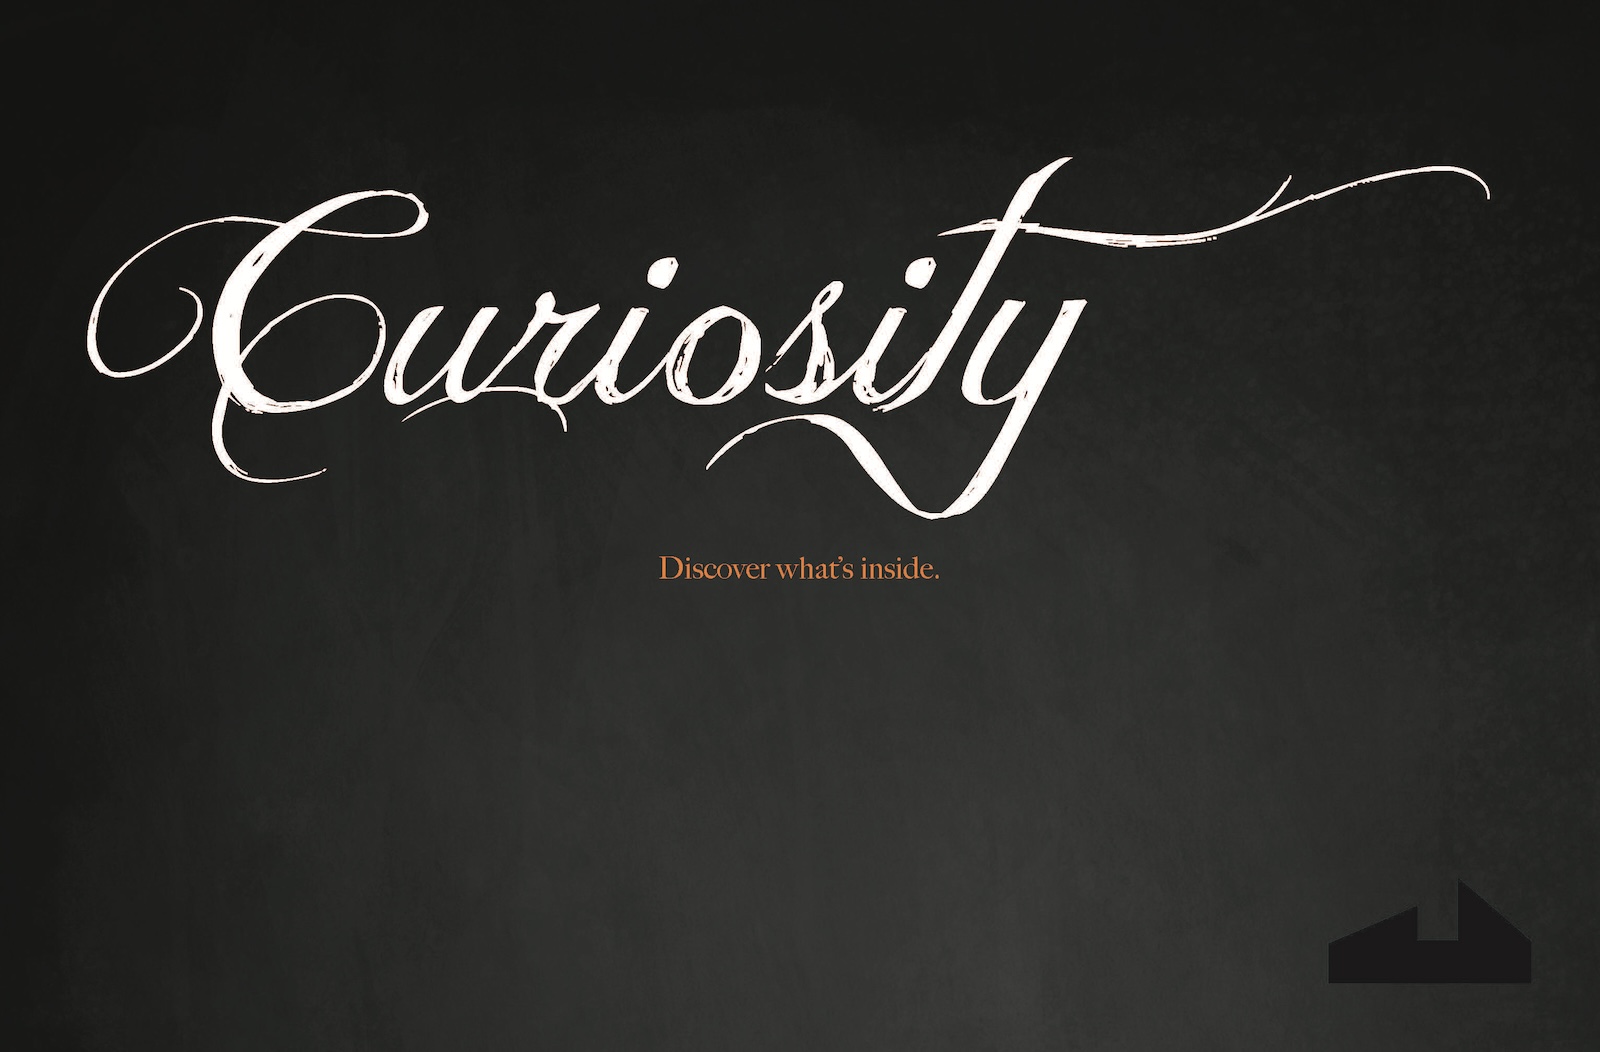 Graphic for Curiosity exhibition